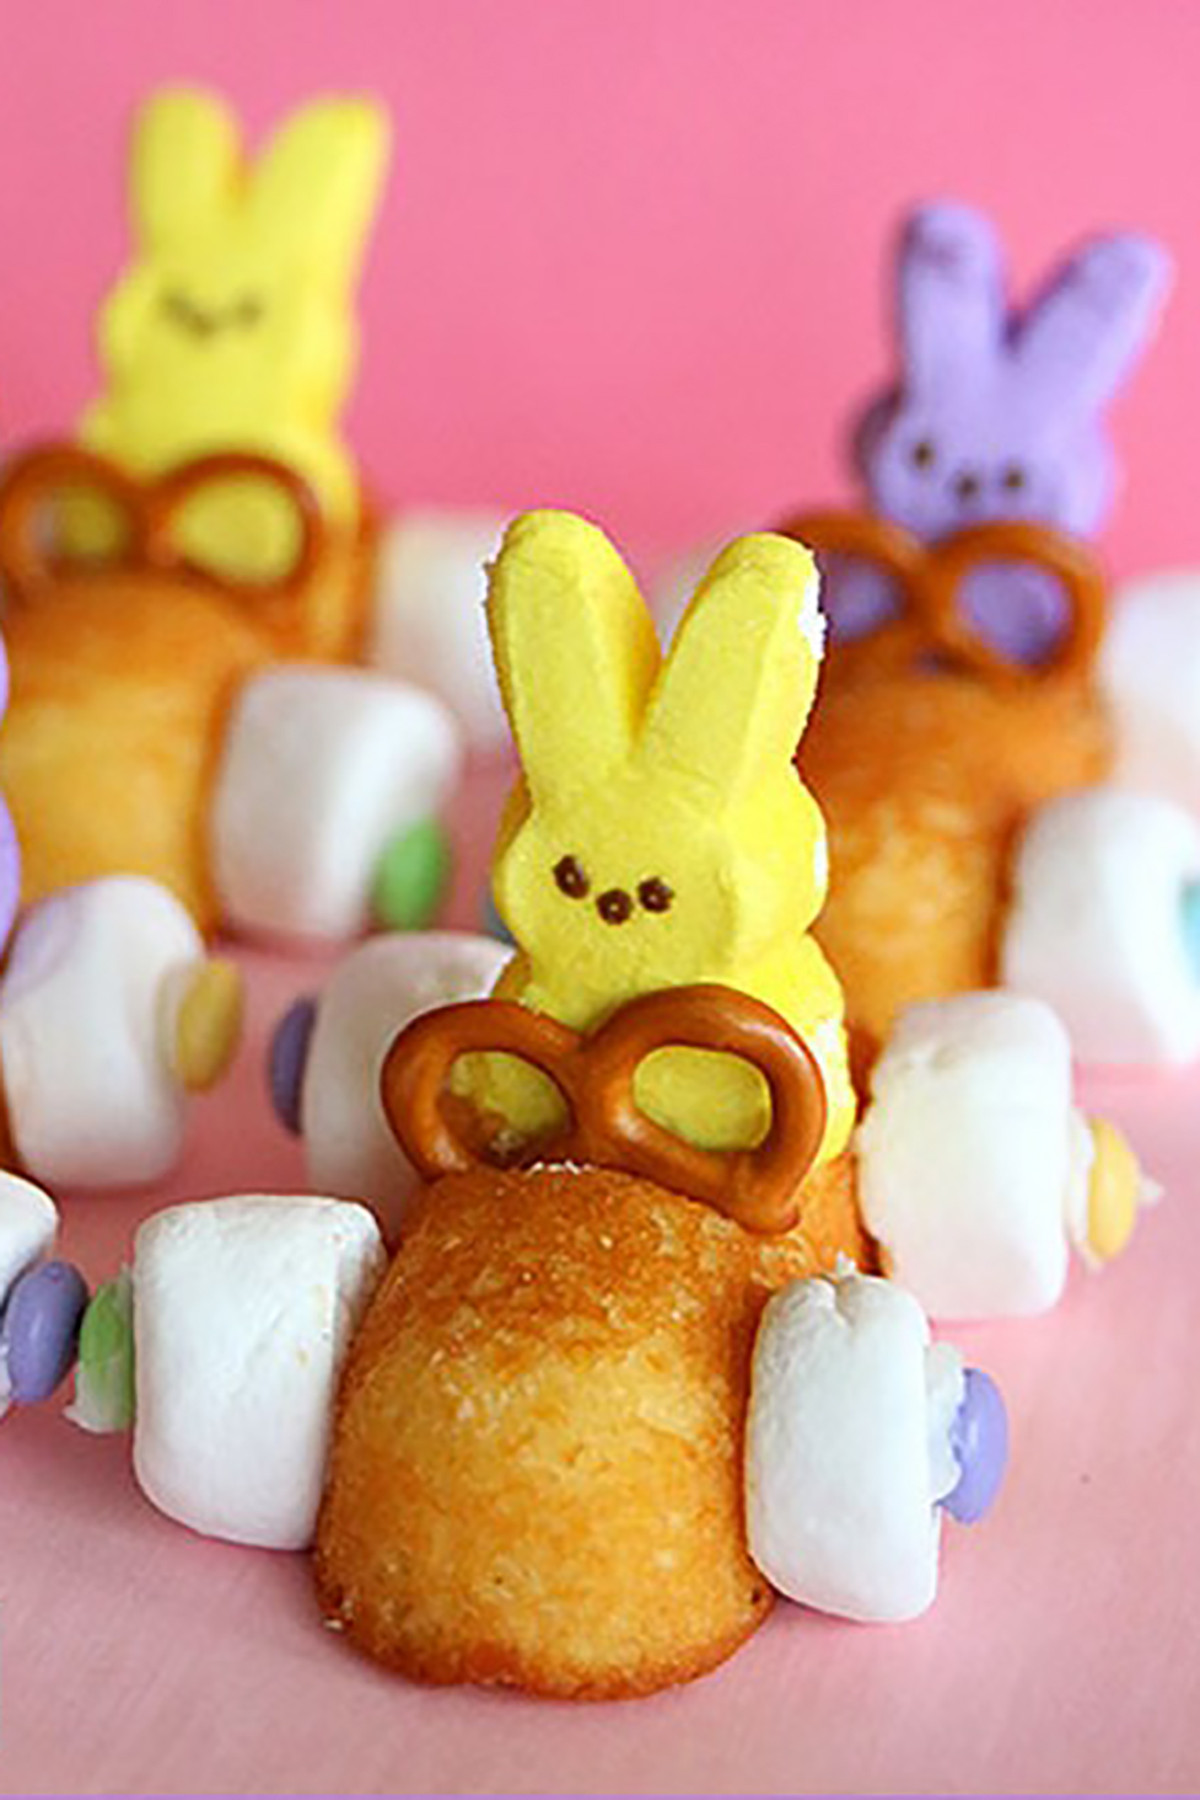 Cute Easter Food Ideas
 15 Best Easter Snacks Easy and Cute Ideas for Easter